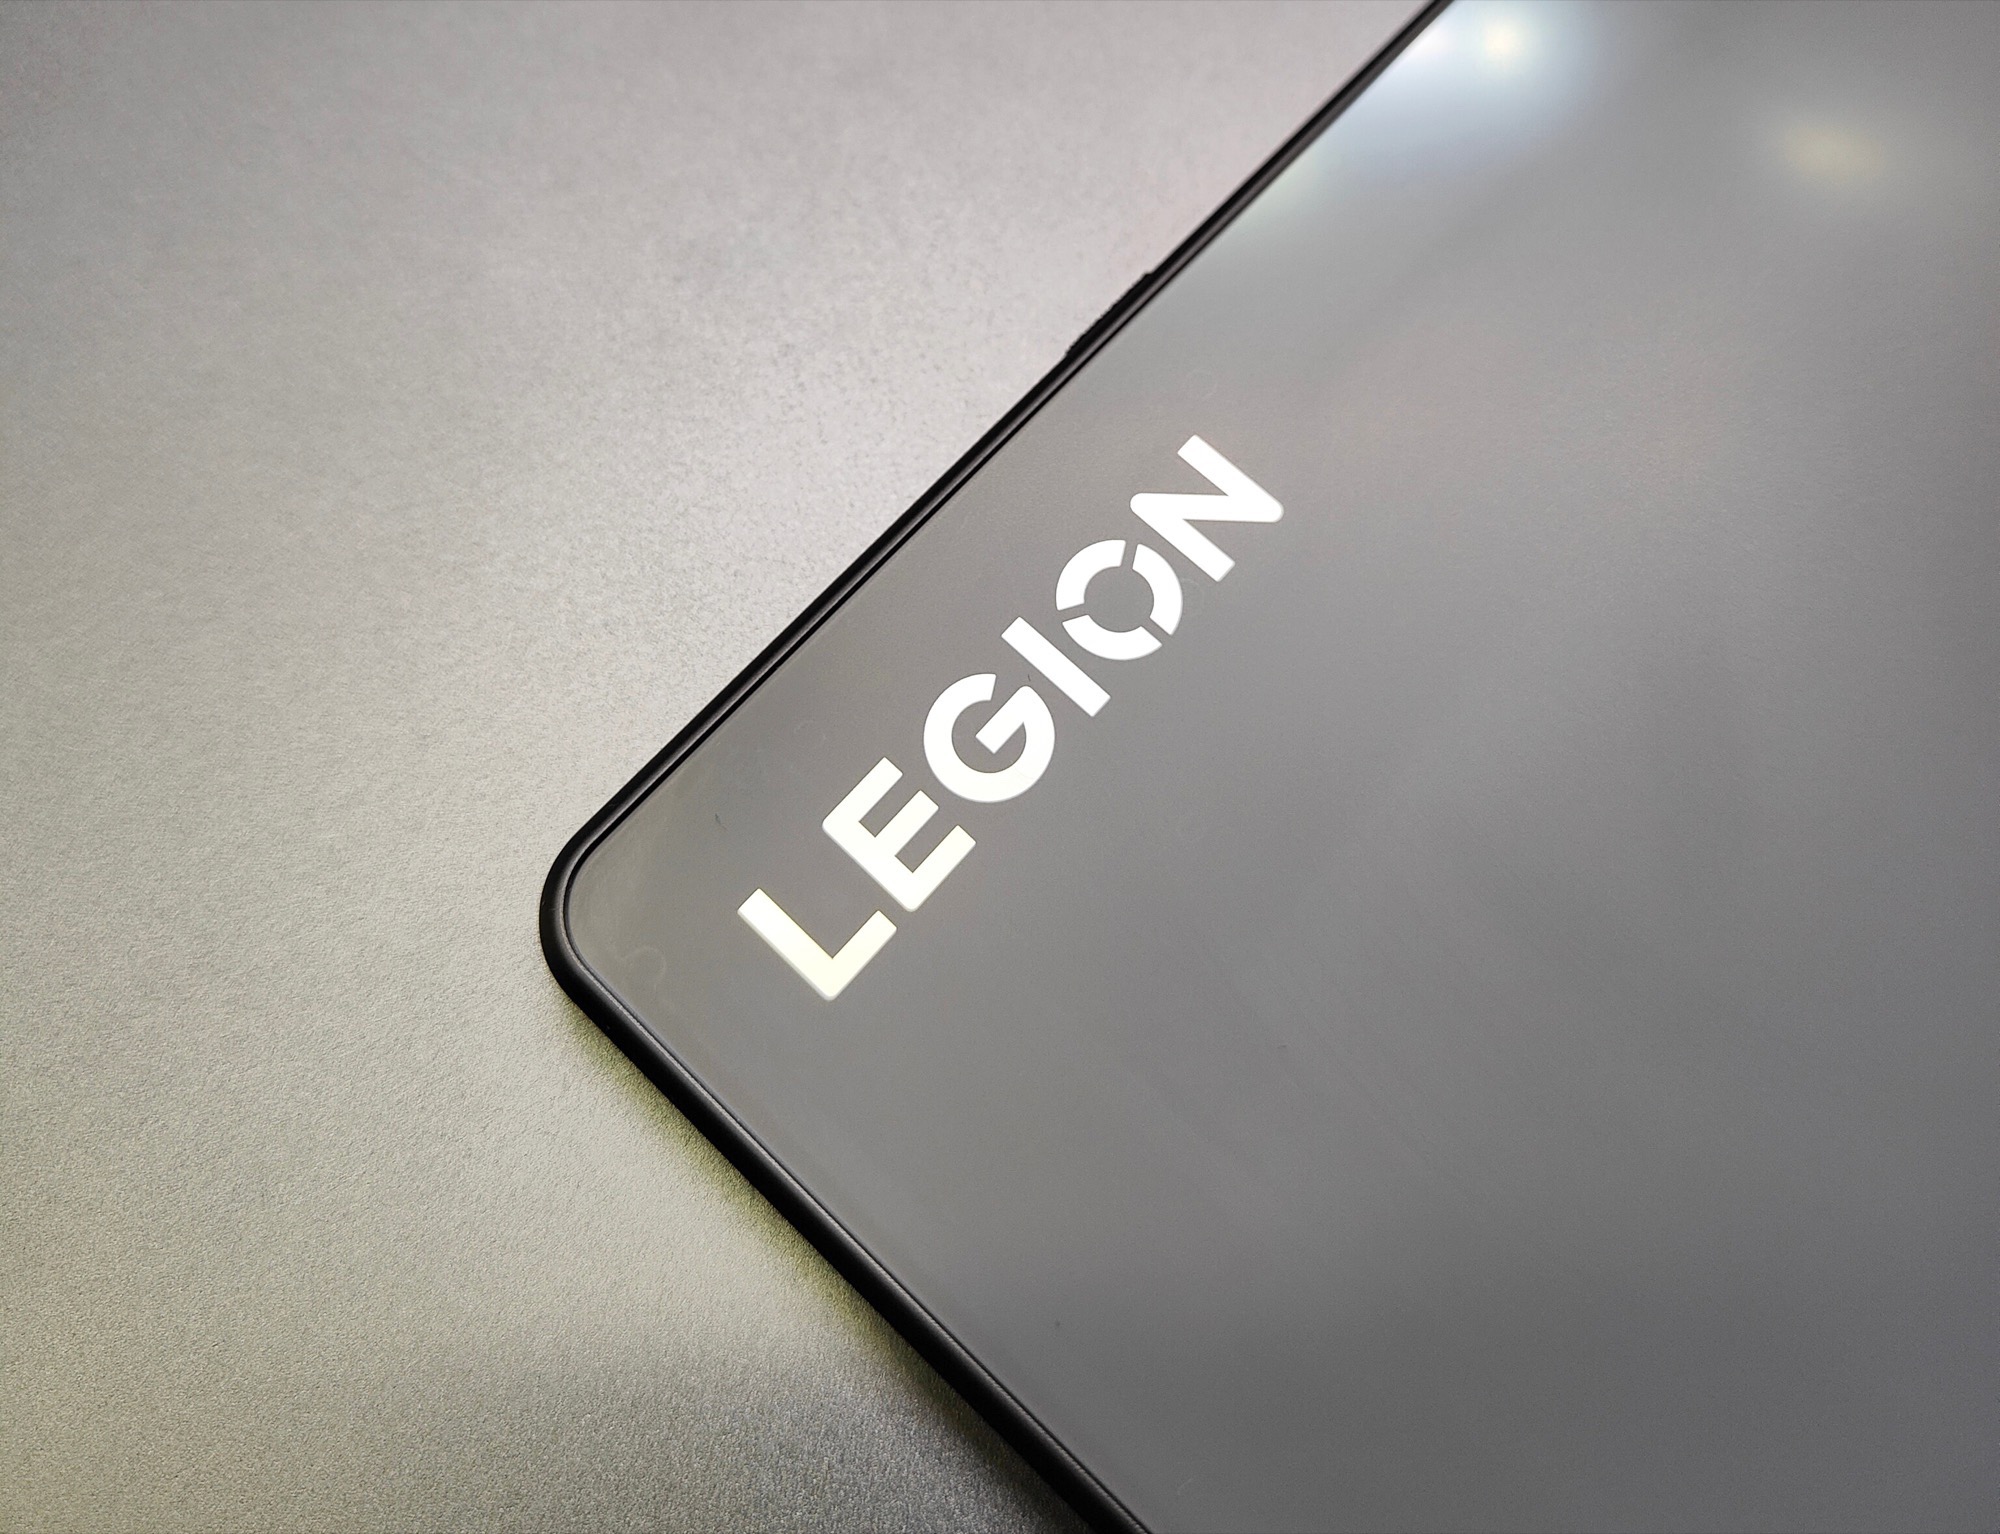 Lenovo Legion Pad: Compact gaming tablet presented with a